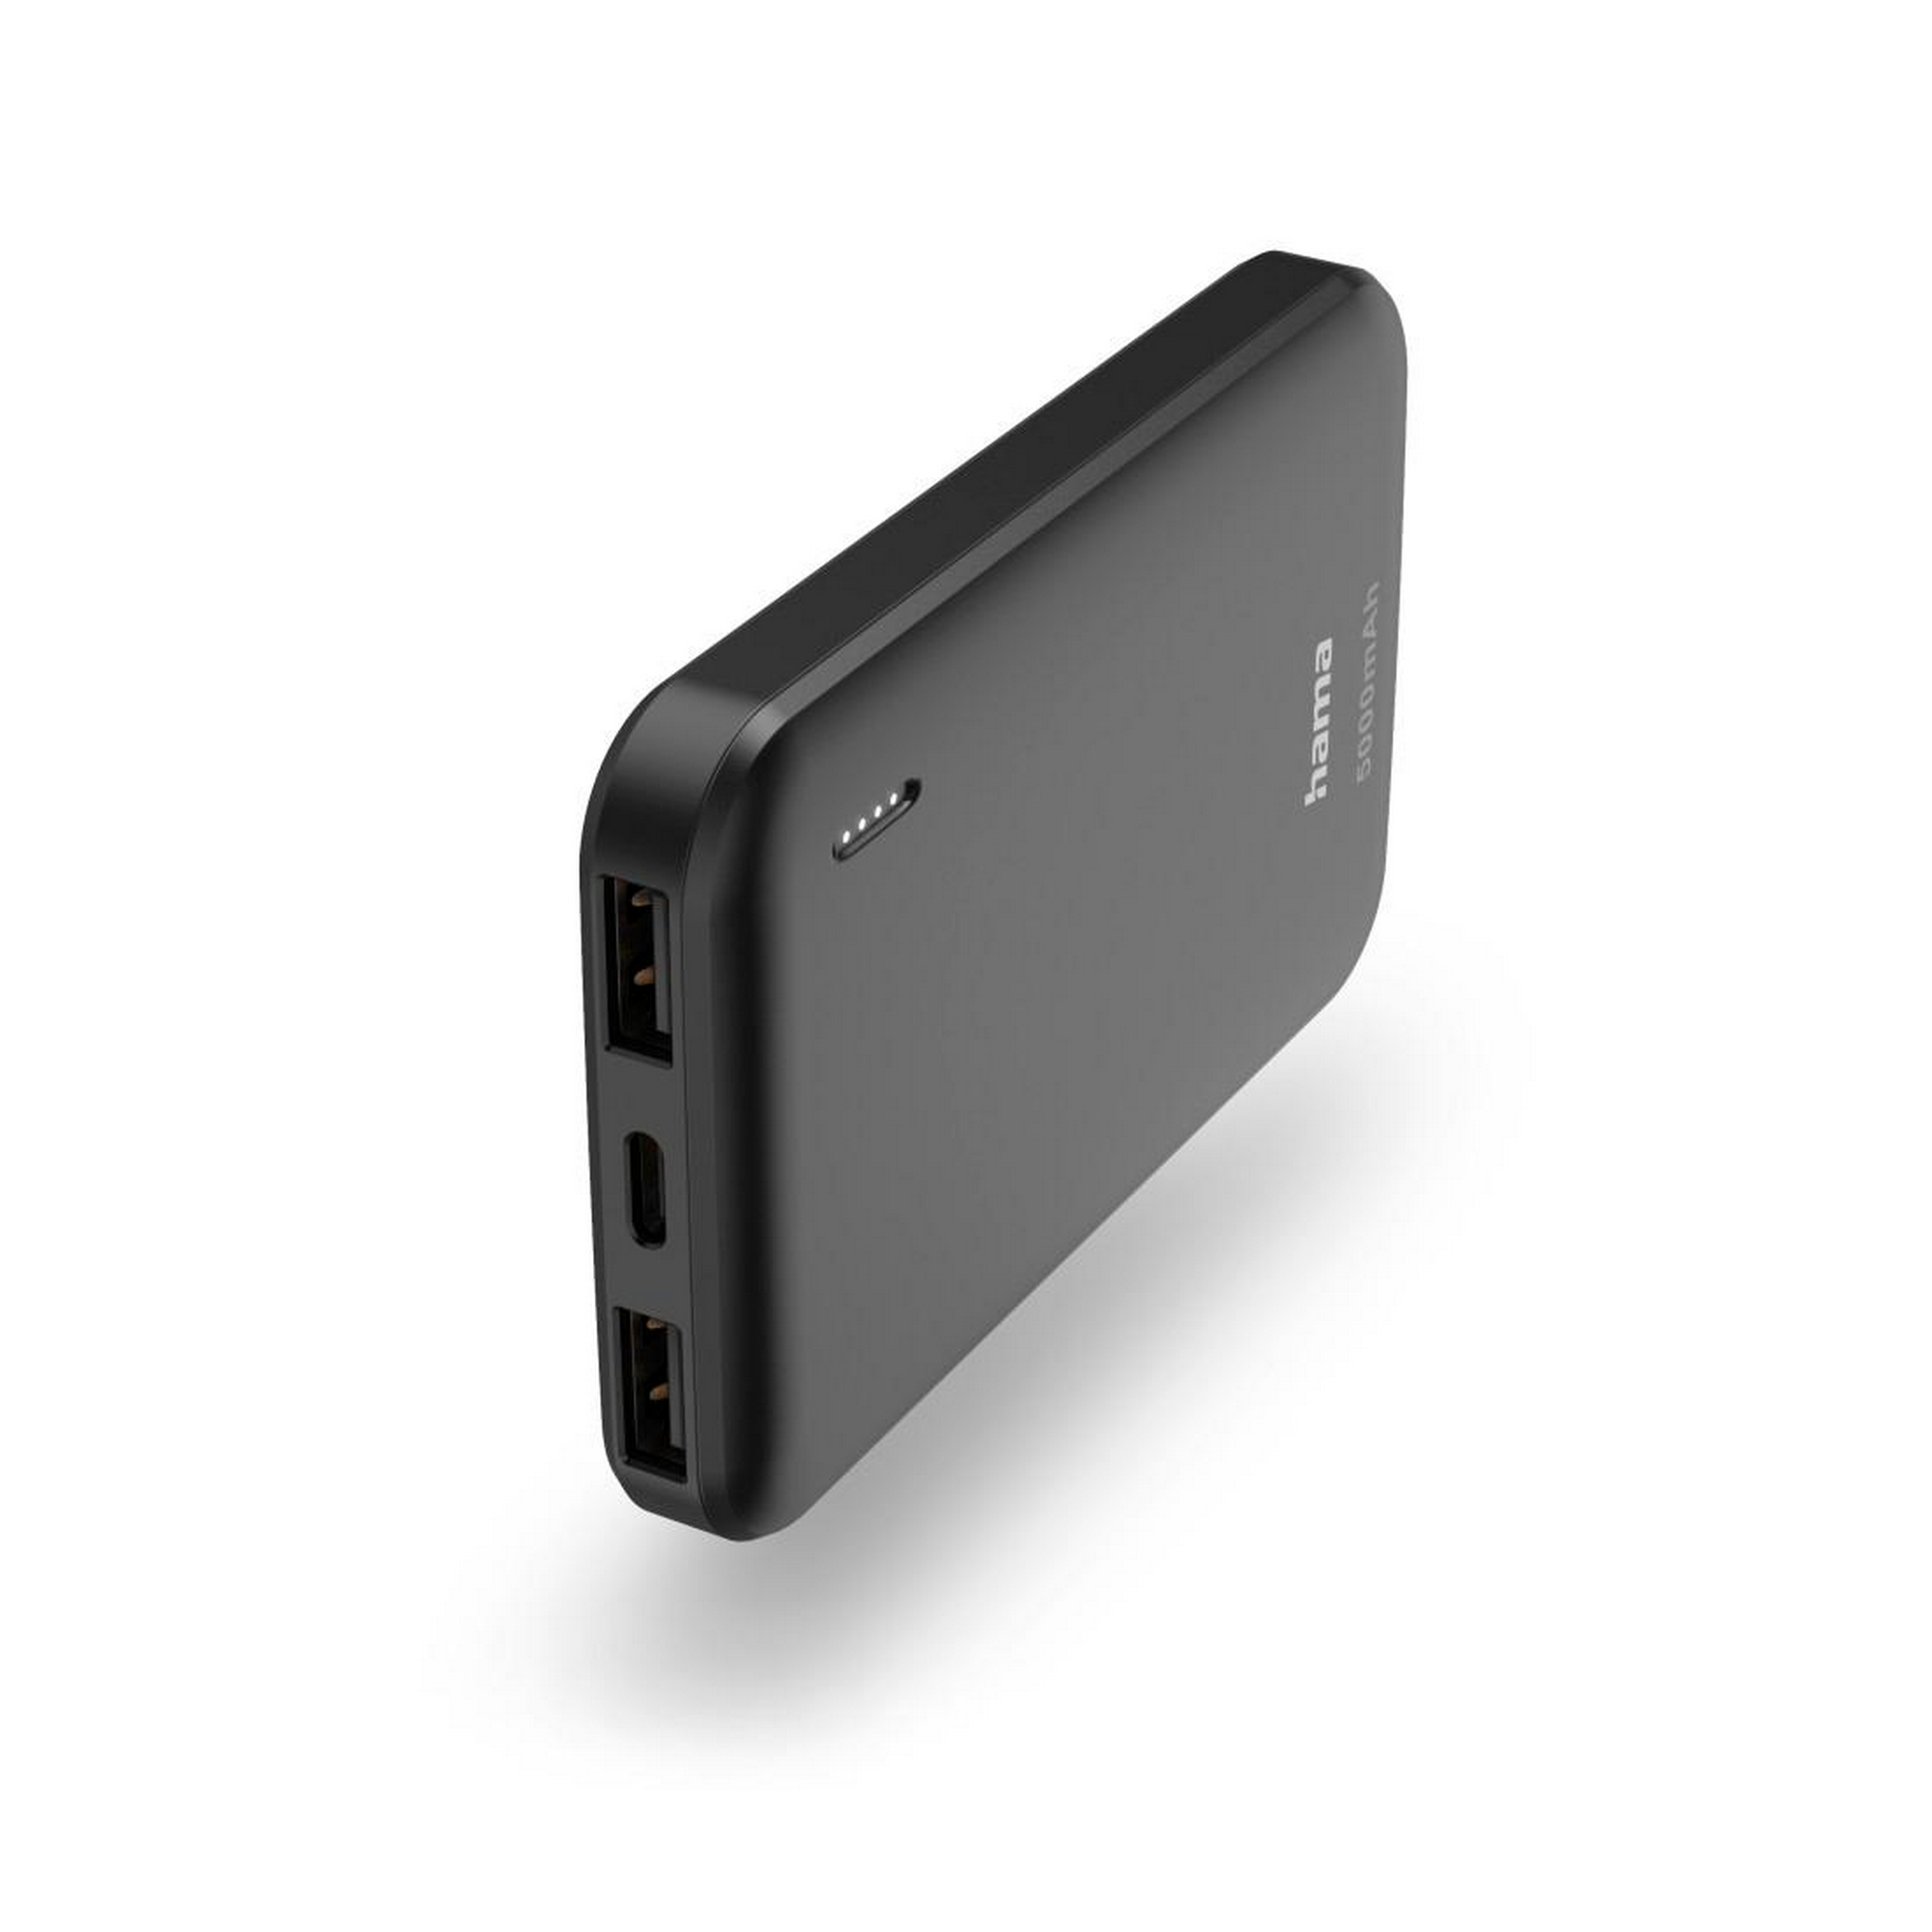 Power Pack 'Pocket 5' anthrazit 5000 mAh, 2 x USB-A + product picture